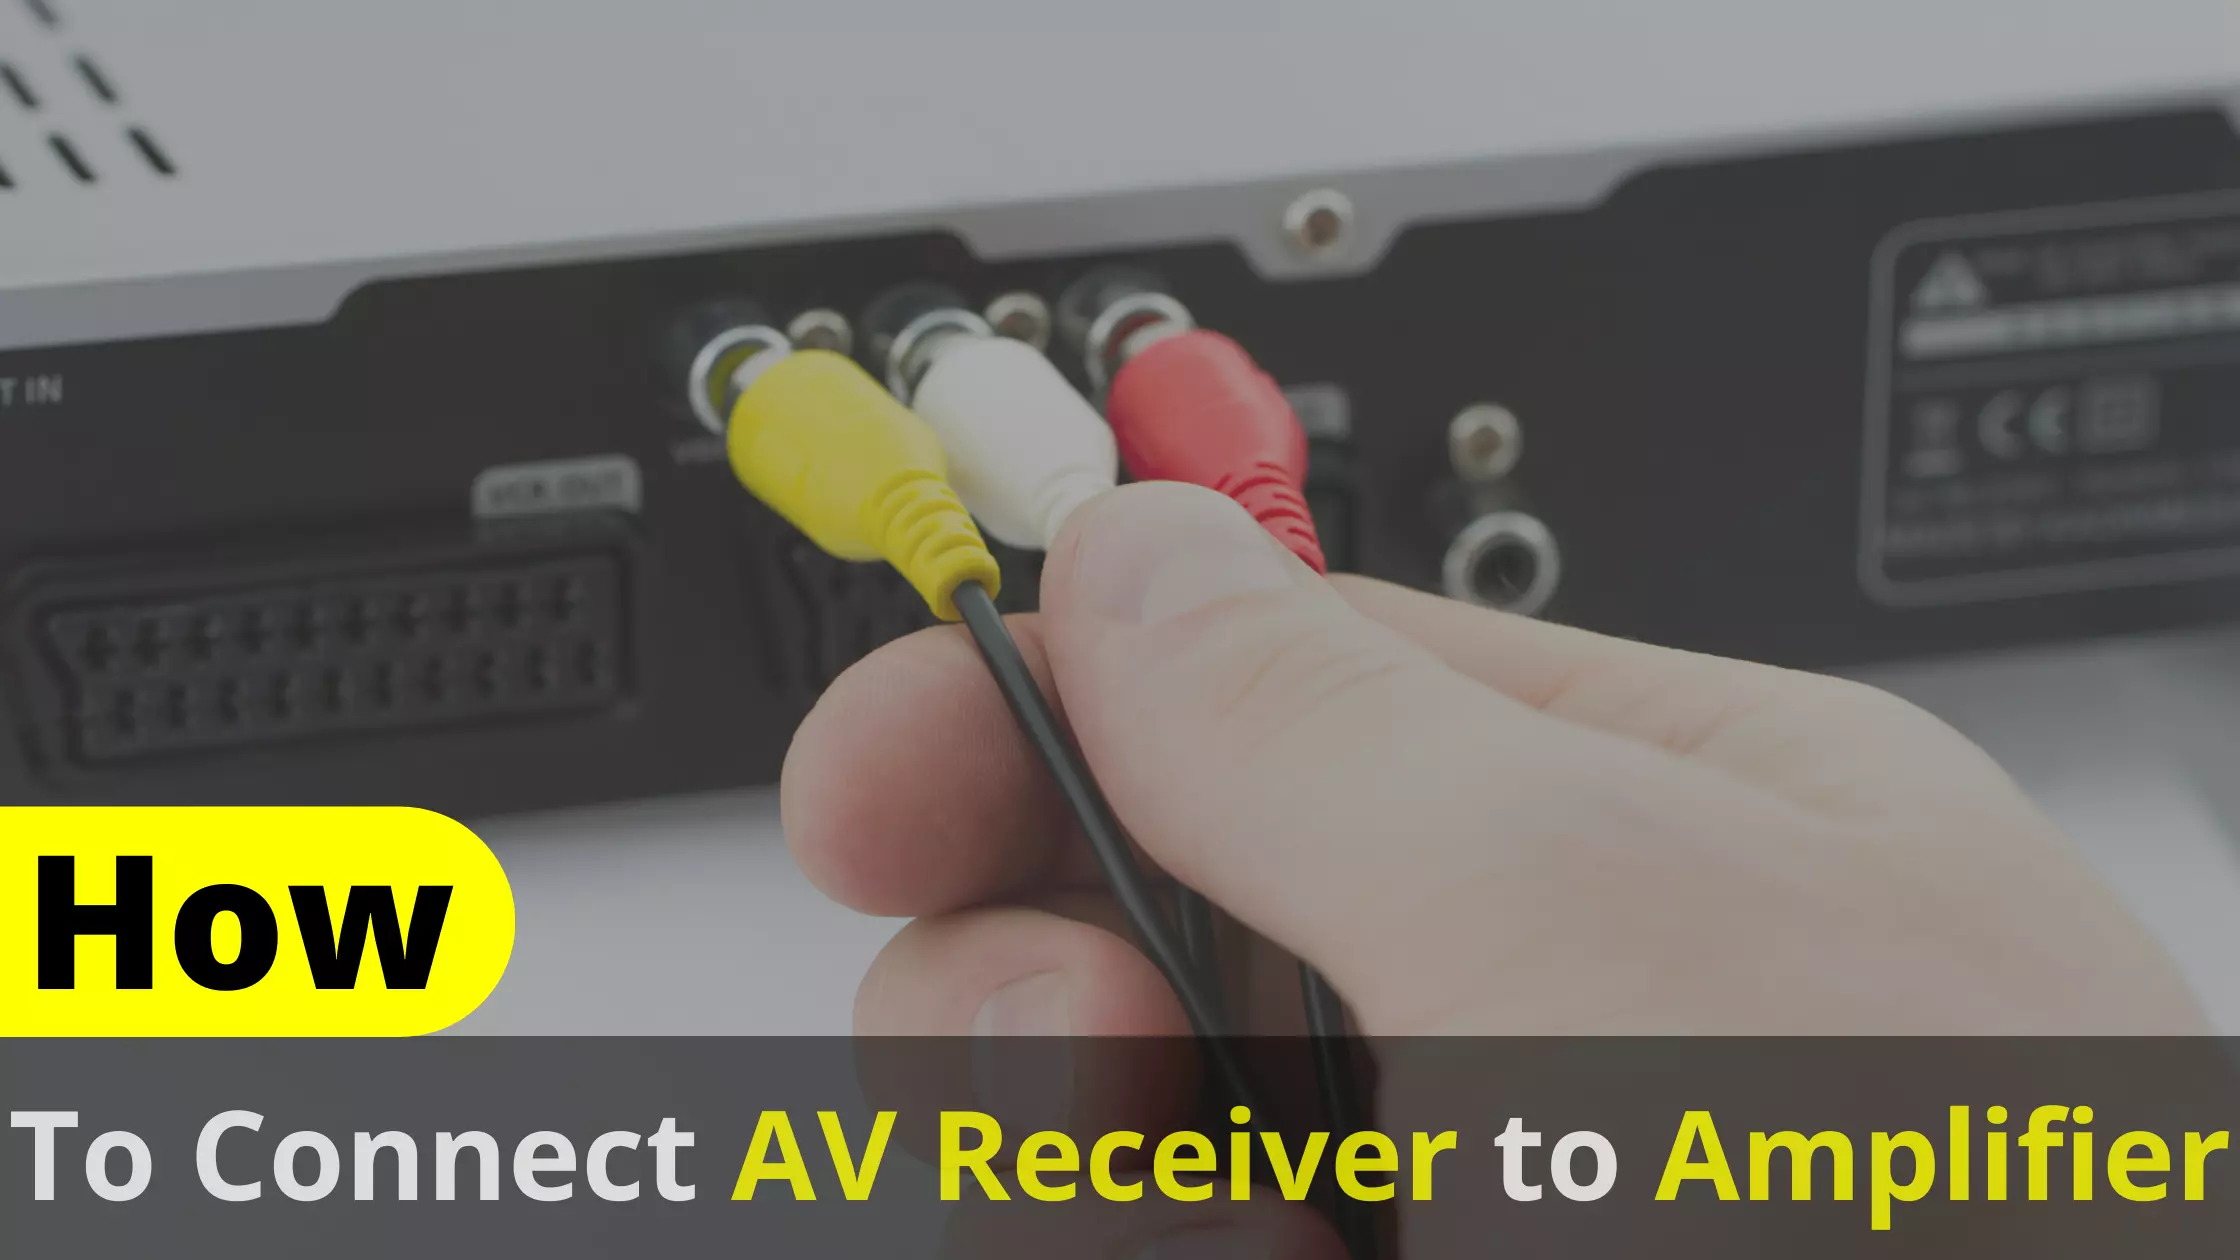 How To Connect AV Reciever To Amplifier?